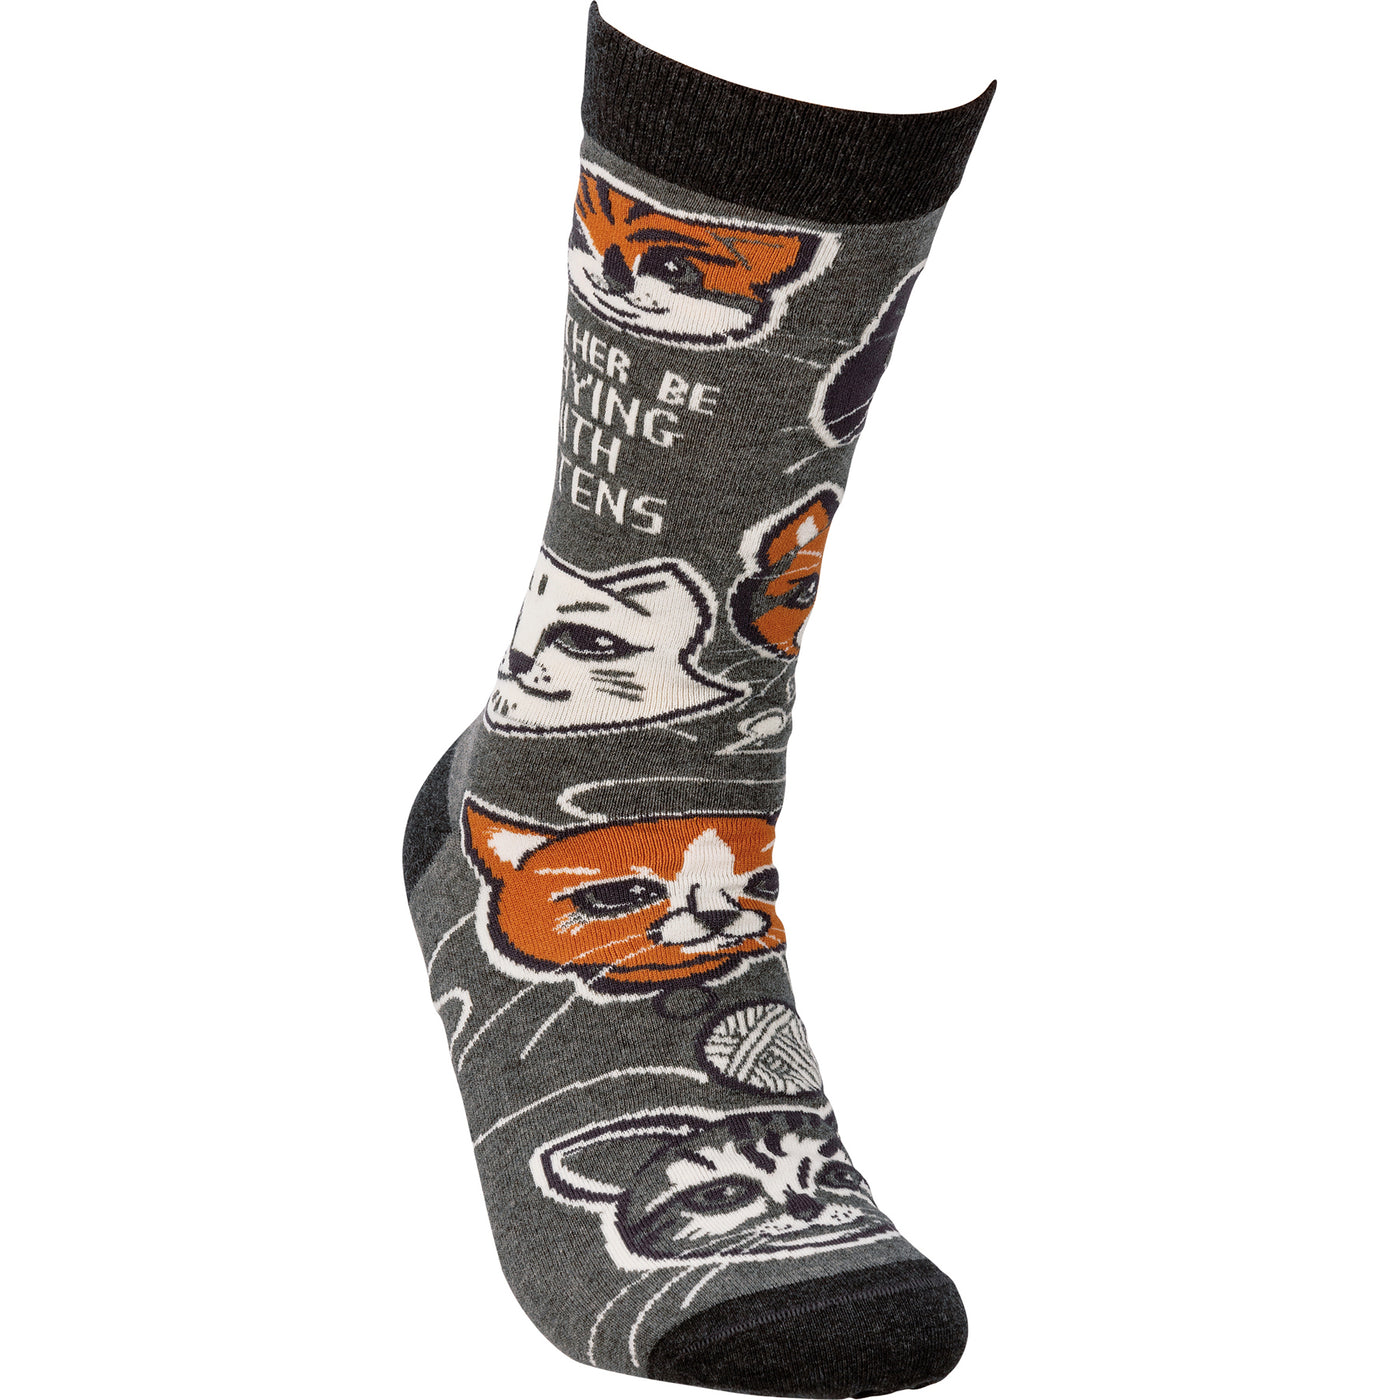 I'd Rather Be Playing With Kittens Unisex Fun Socks